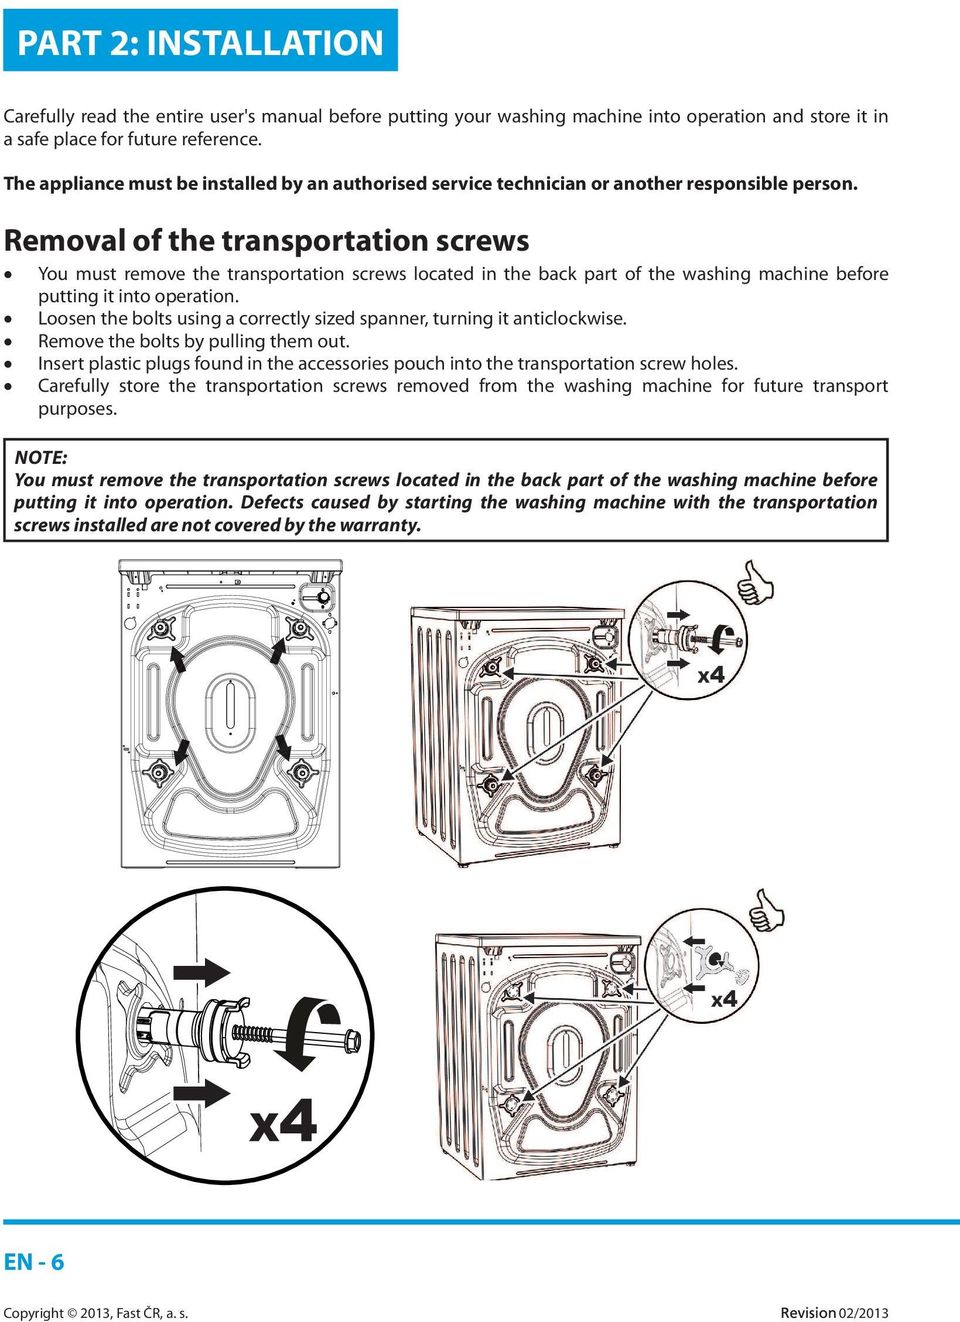 Removal of the transportation screws You must remove the transportation screws located in the back part of the washing machine before putting it into operation.